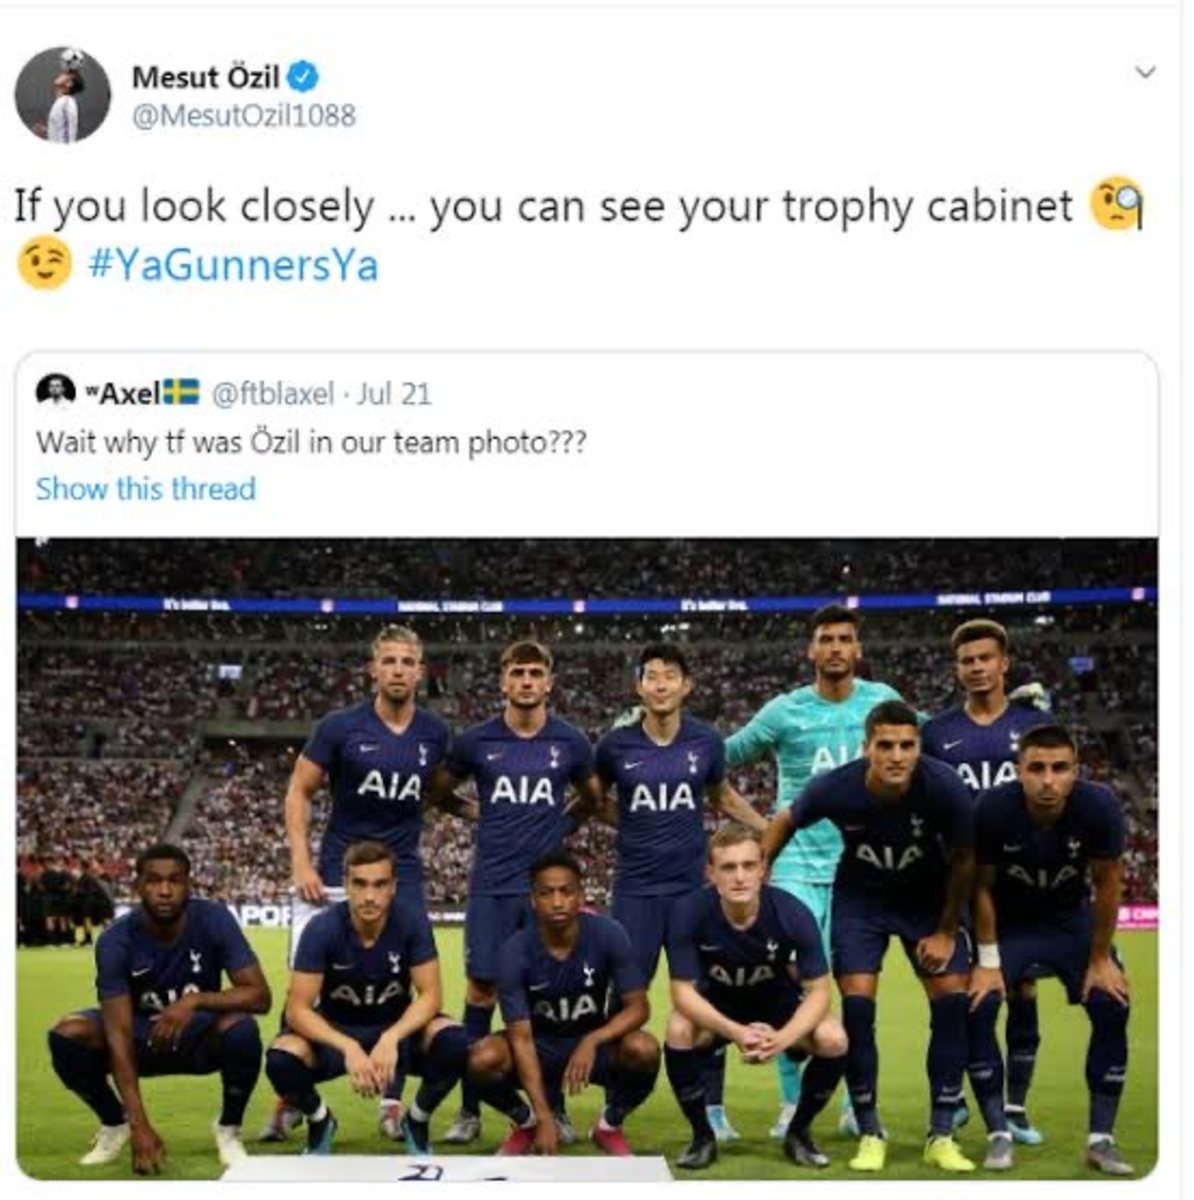 A tweet posted by Mesut Ozil in 2019 mocking Tottenham Hotspur's lack of trophies